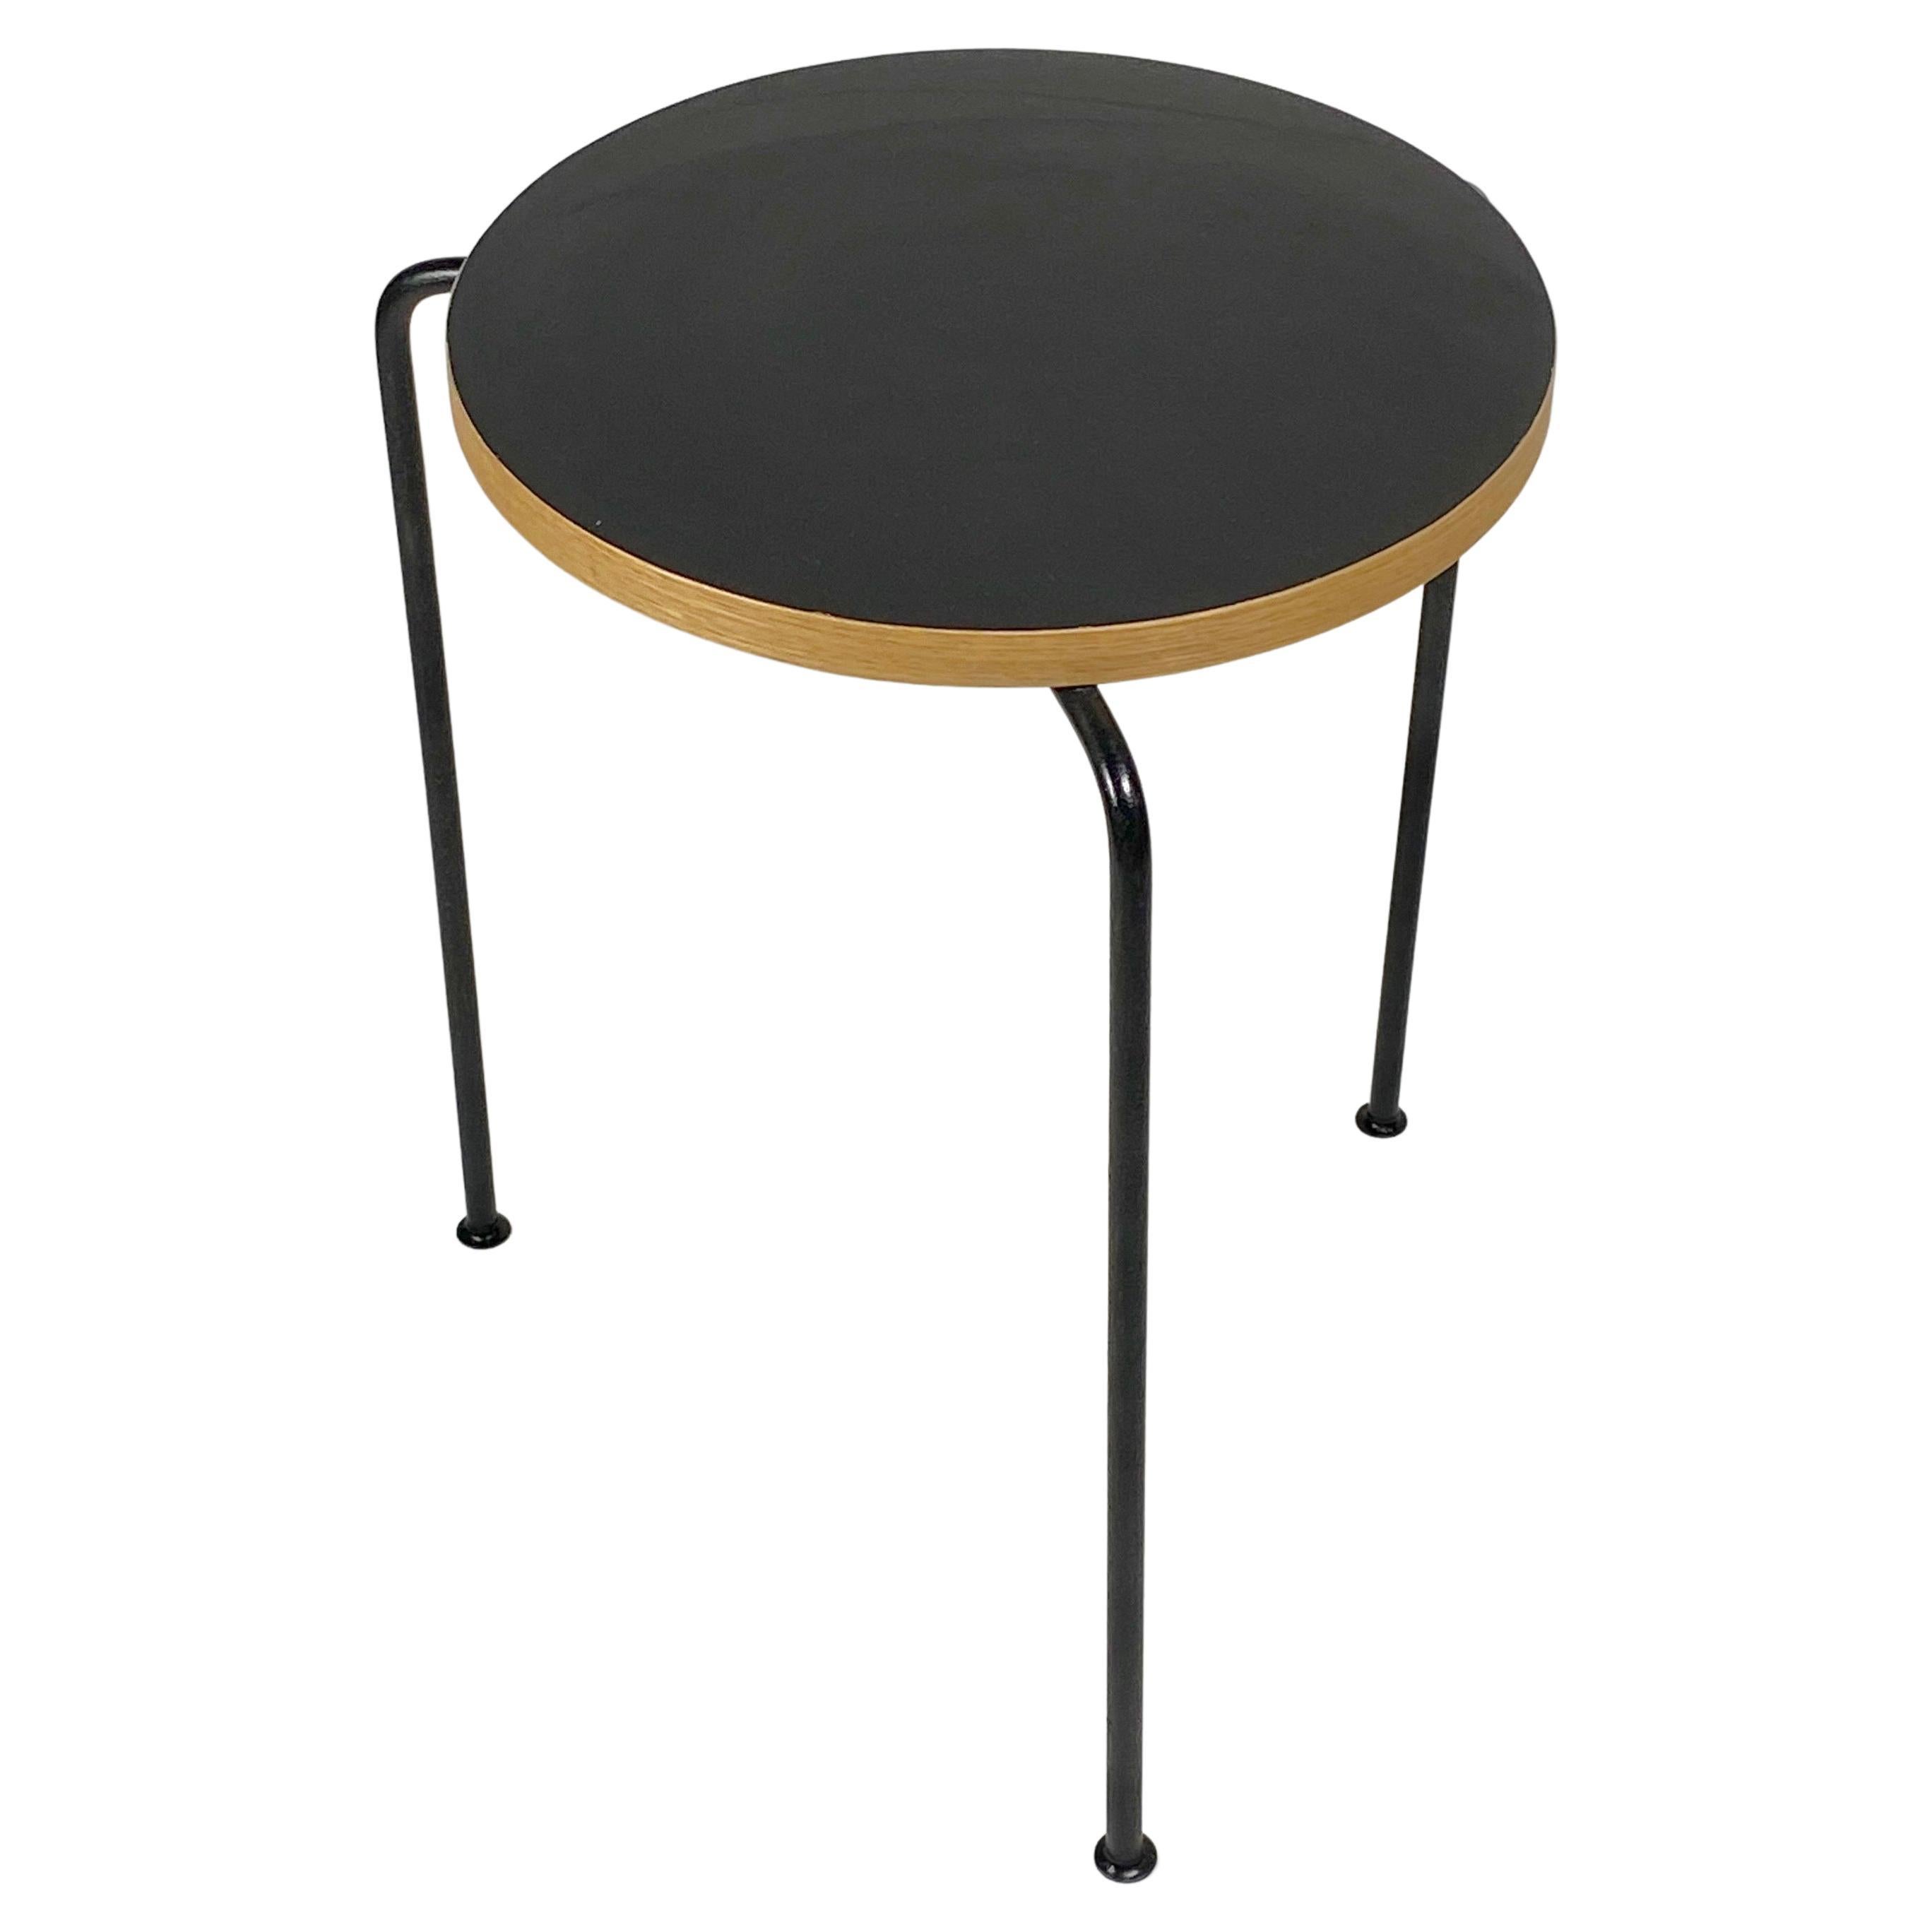 California Modernist Design Stool Attributed to Bay Area Designer Luther Conover